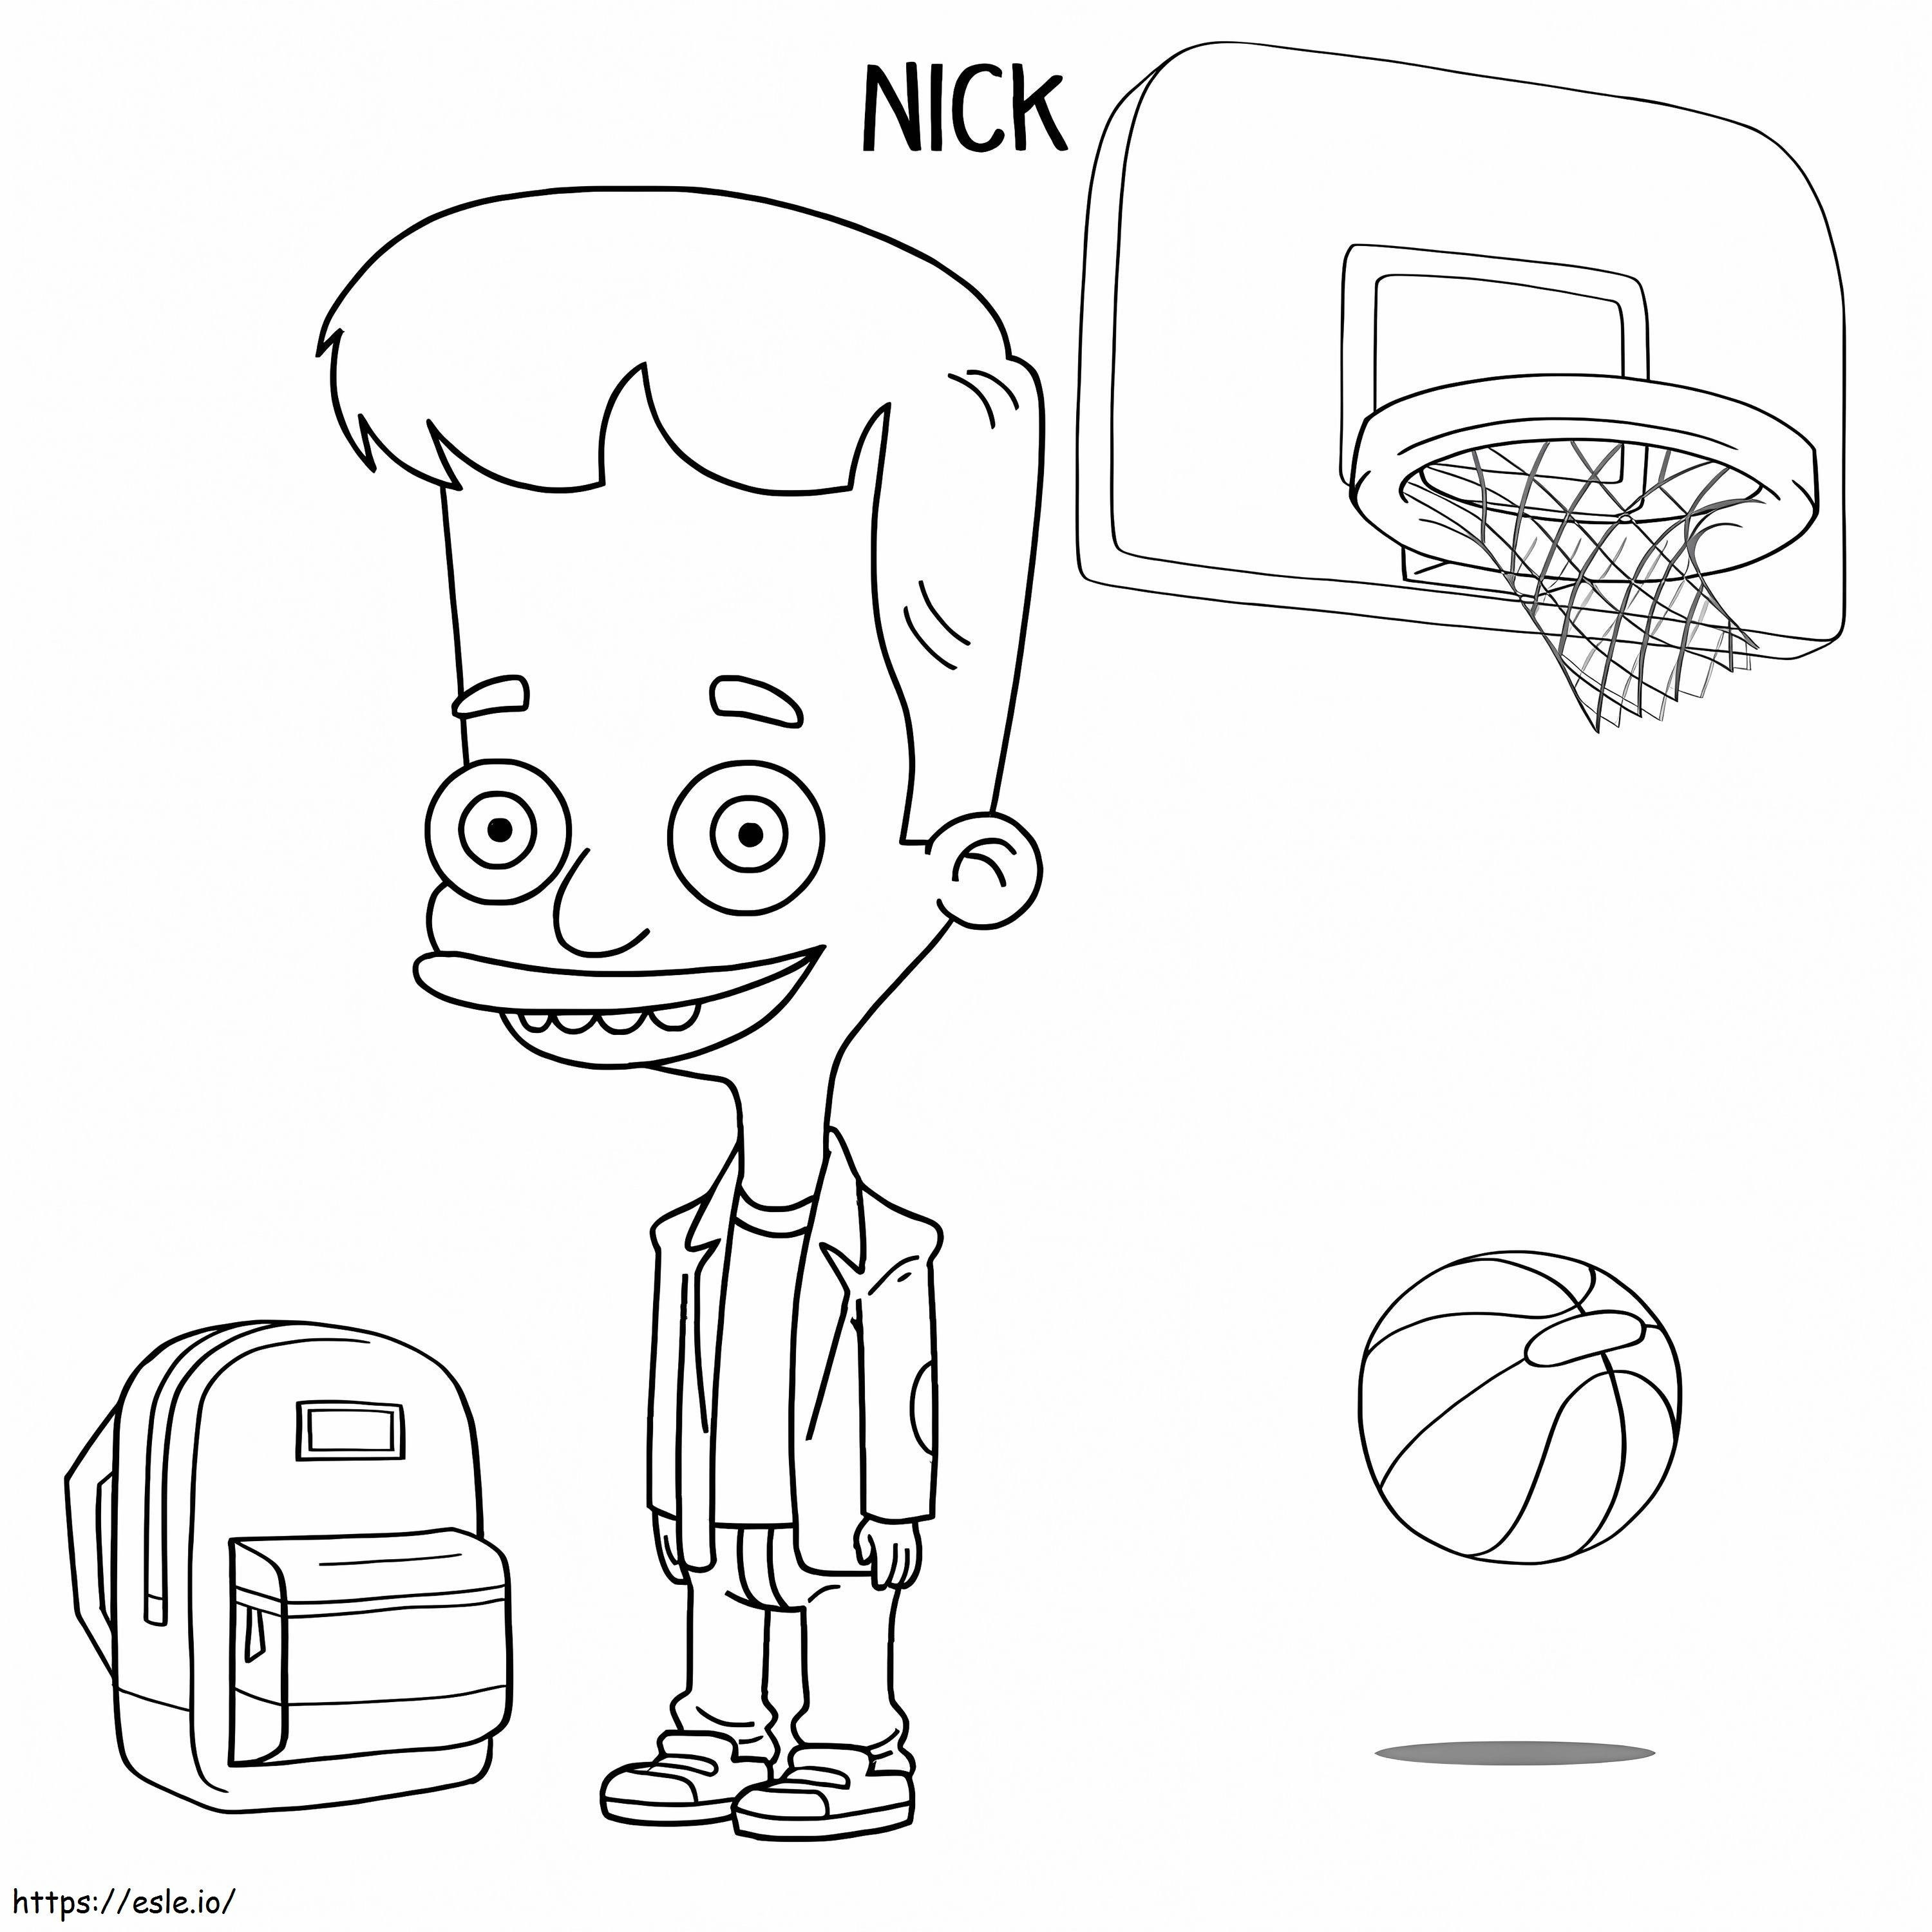 Nick Birch From Big Mouth coloring page